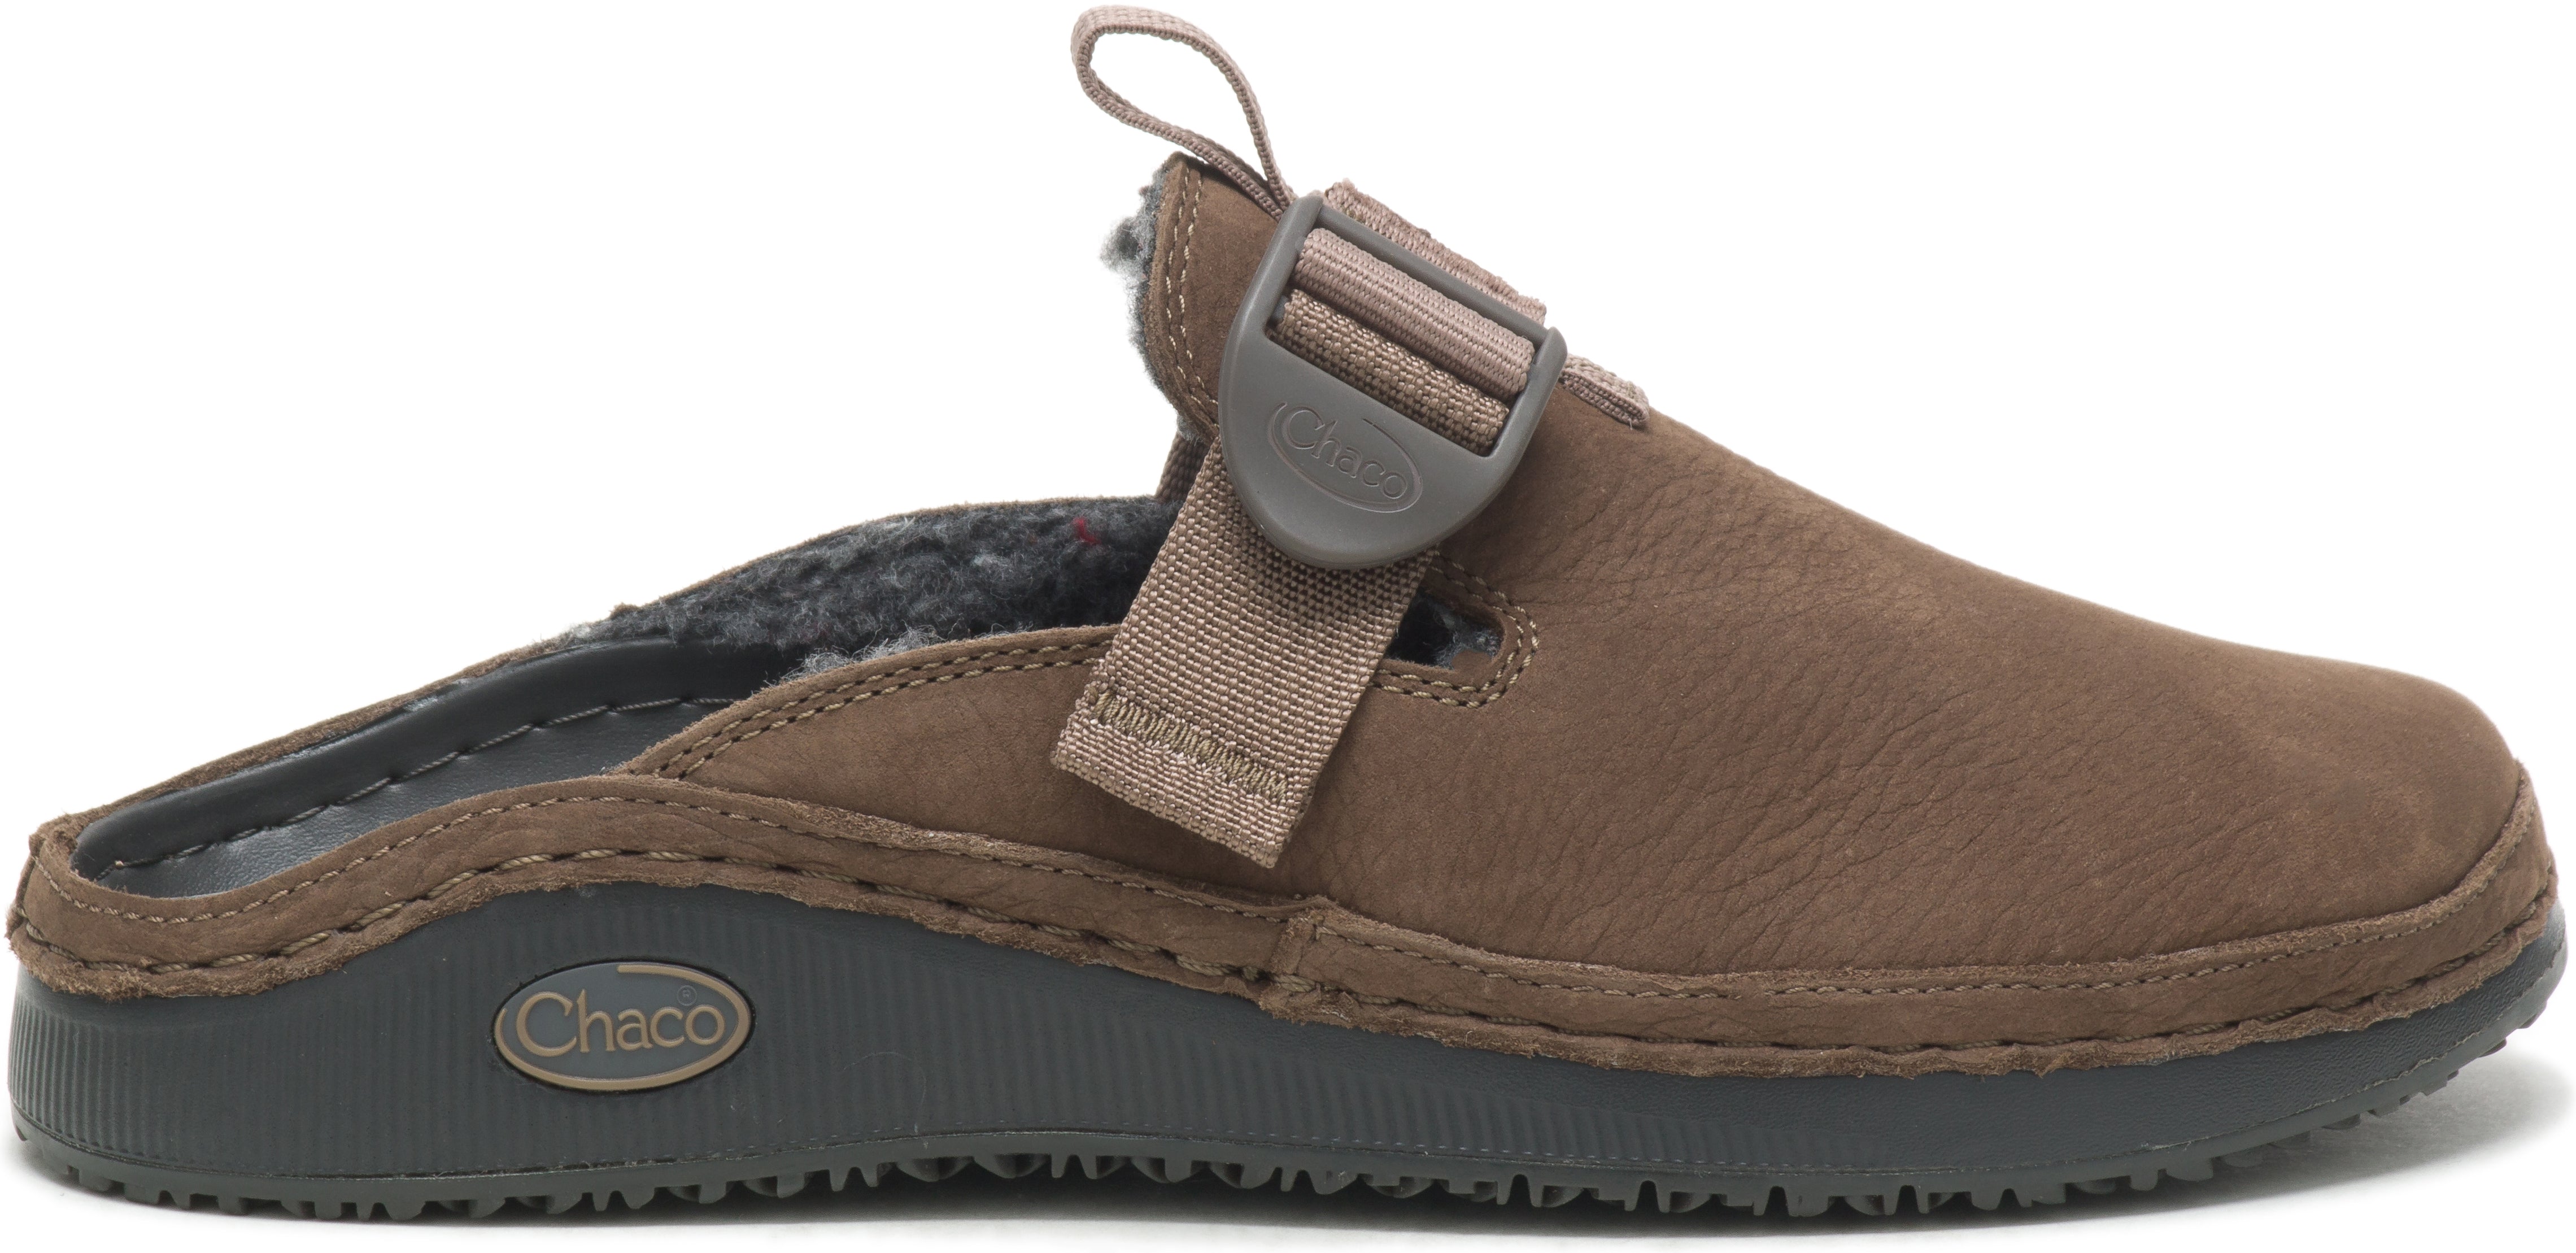 Chaco Women's Paonia Clog Fluff